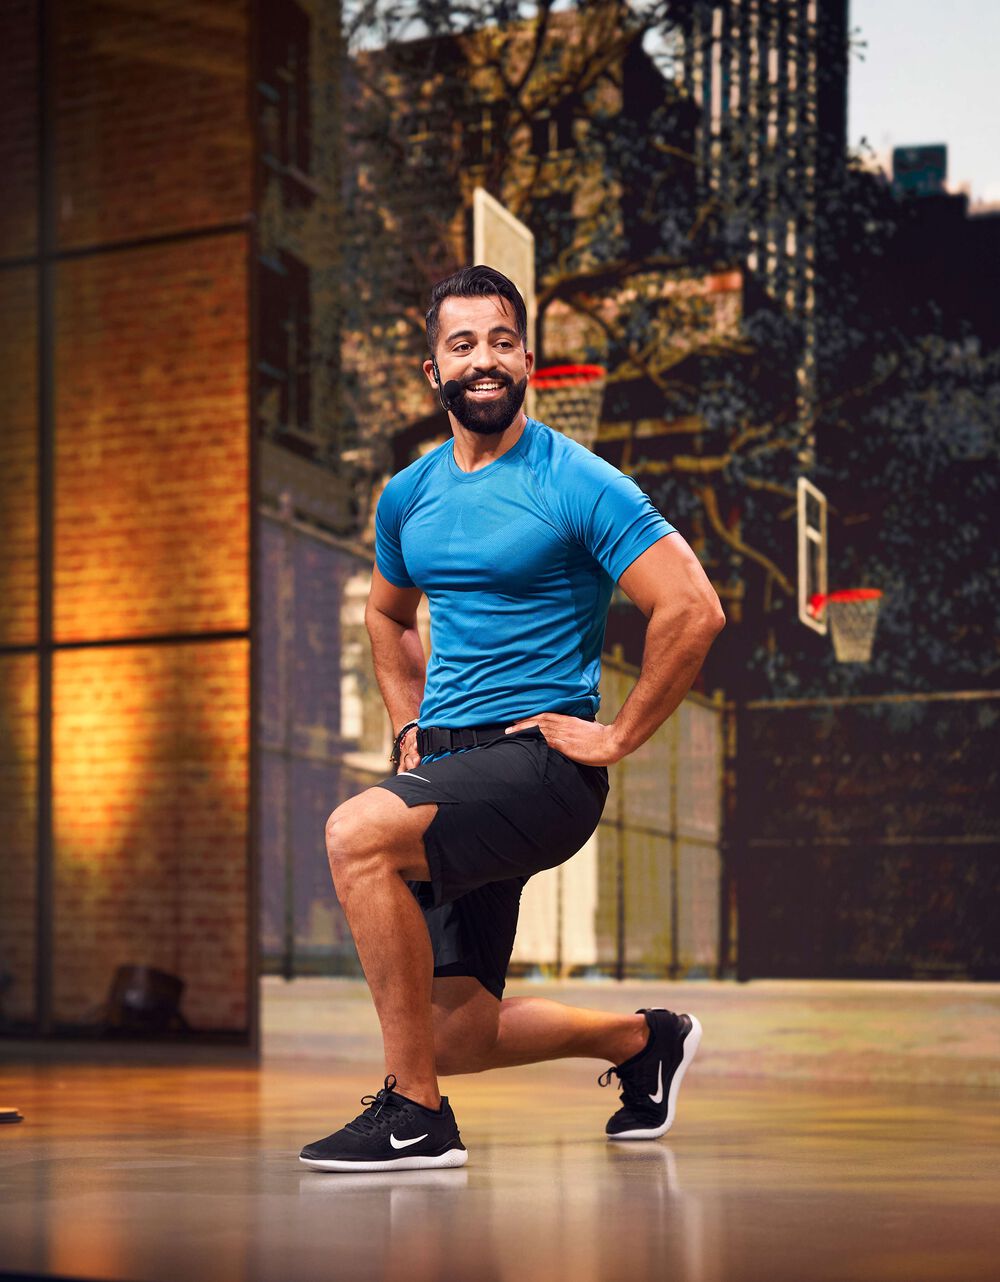 Video presenter Mohamed doing front lunges in the studio